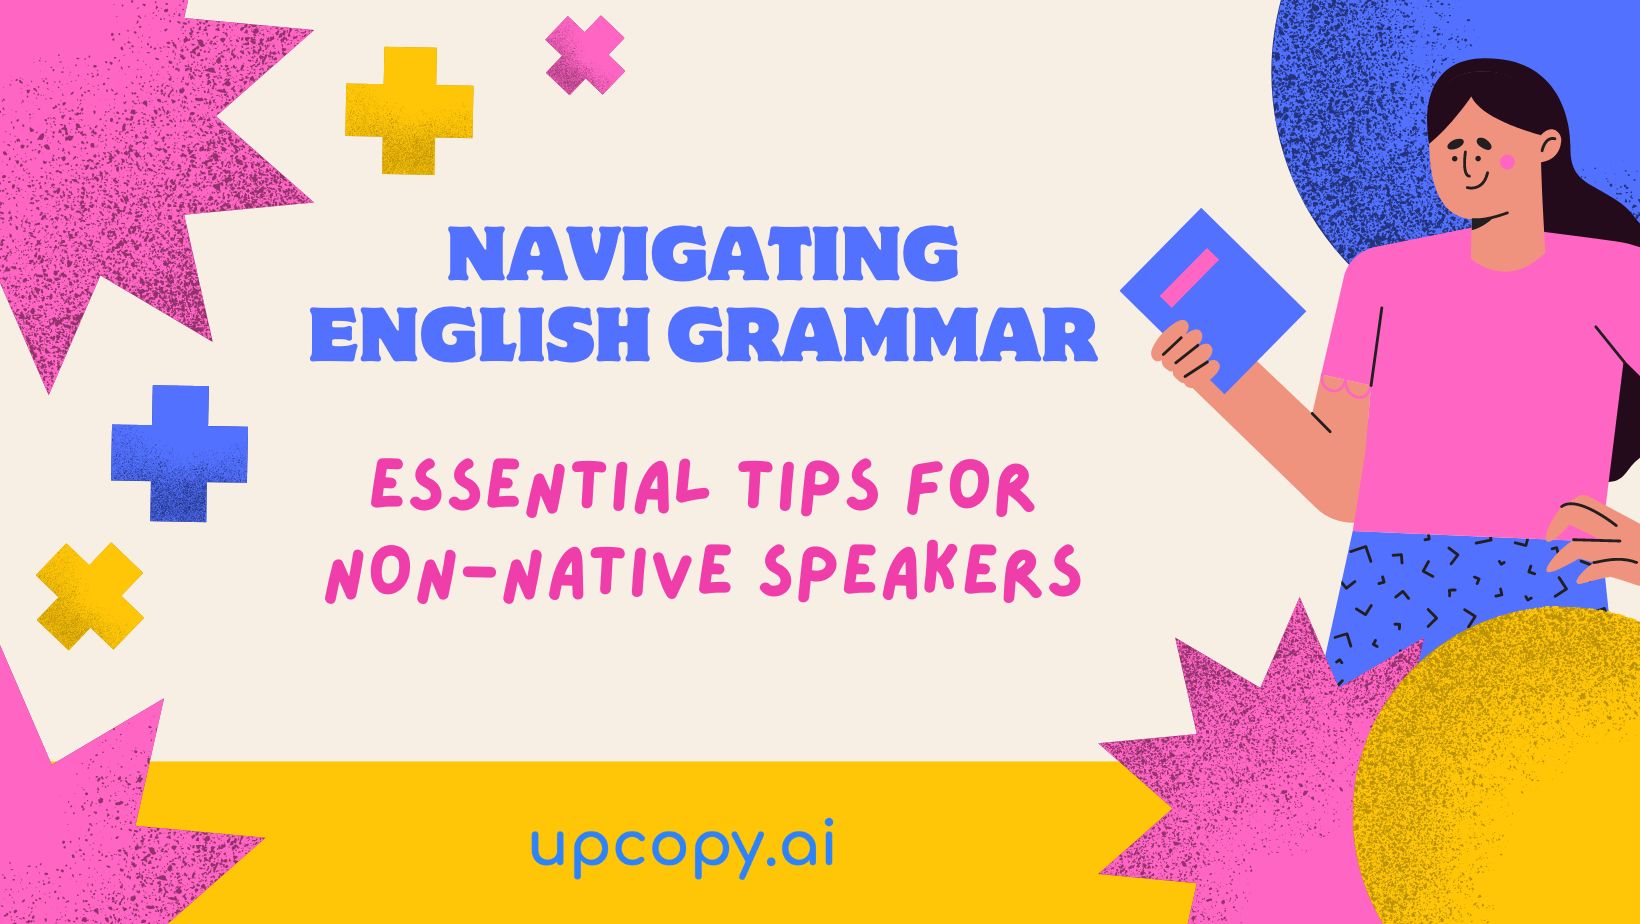 Navigating-English-Grammar-Essential-Tips-for-Non-Native-Speakers - Upcopy.ai Blog